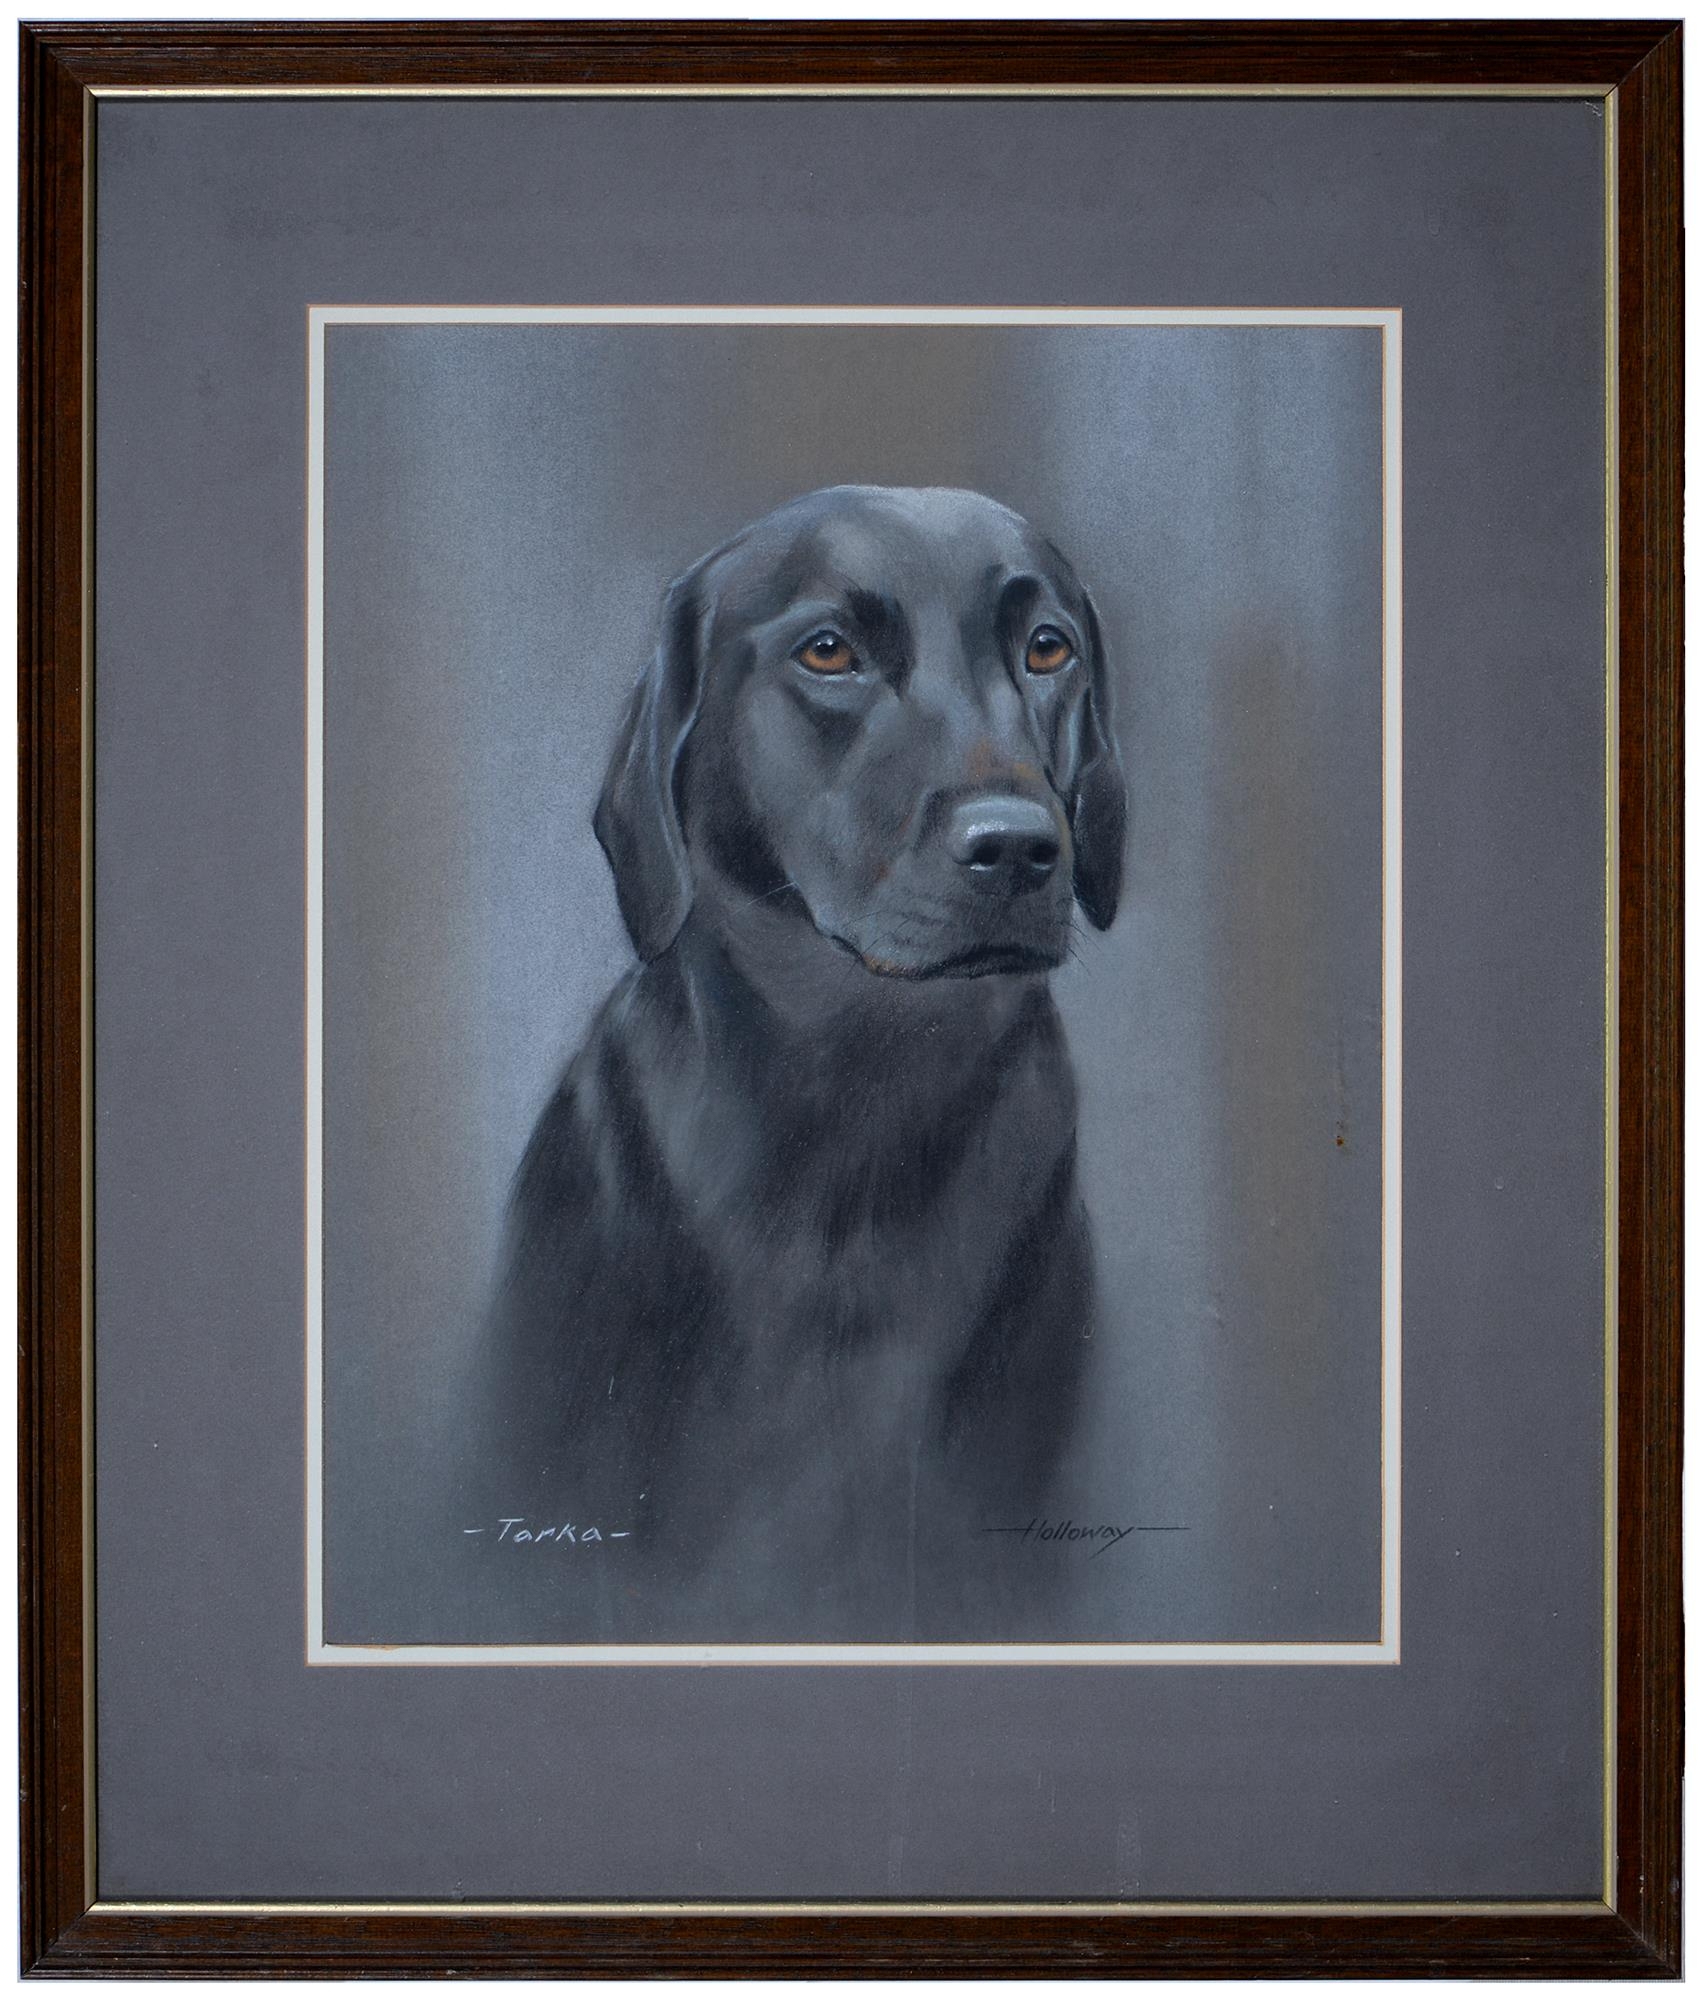 Pictures and Prints. Holloway, 20th c - Tara, portrait of a Labrador, signed and titled, pastel, - Image 8 of 9